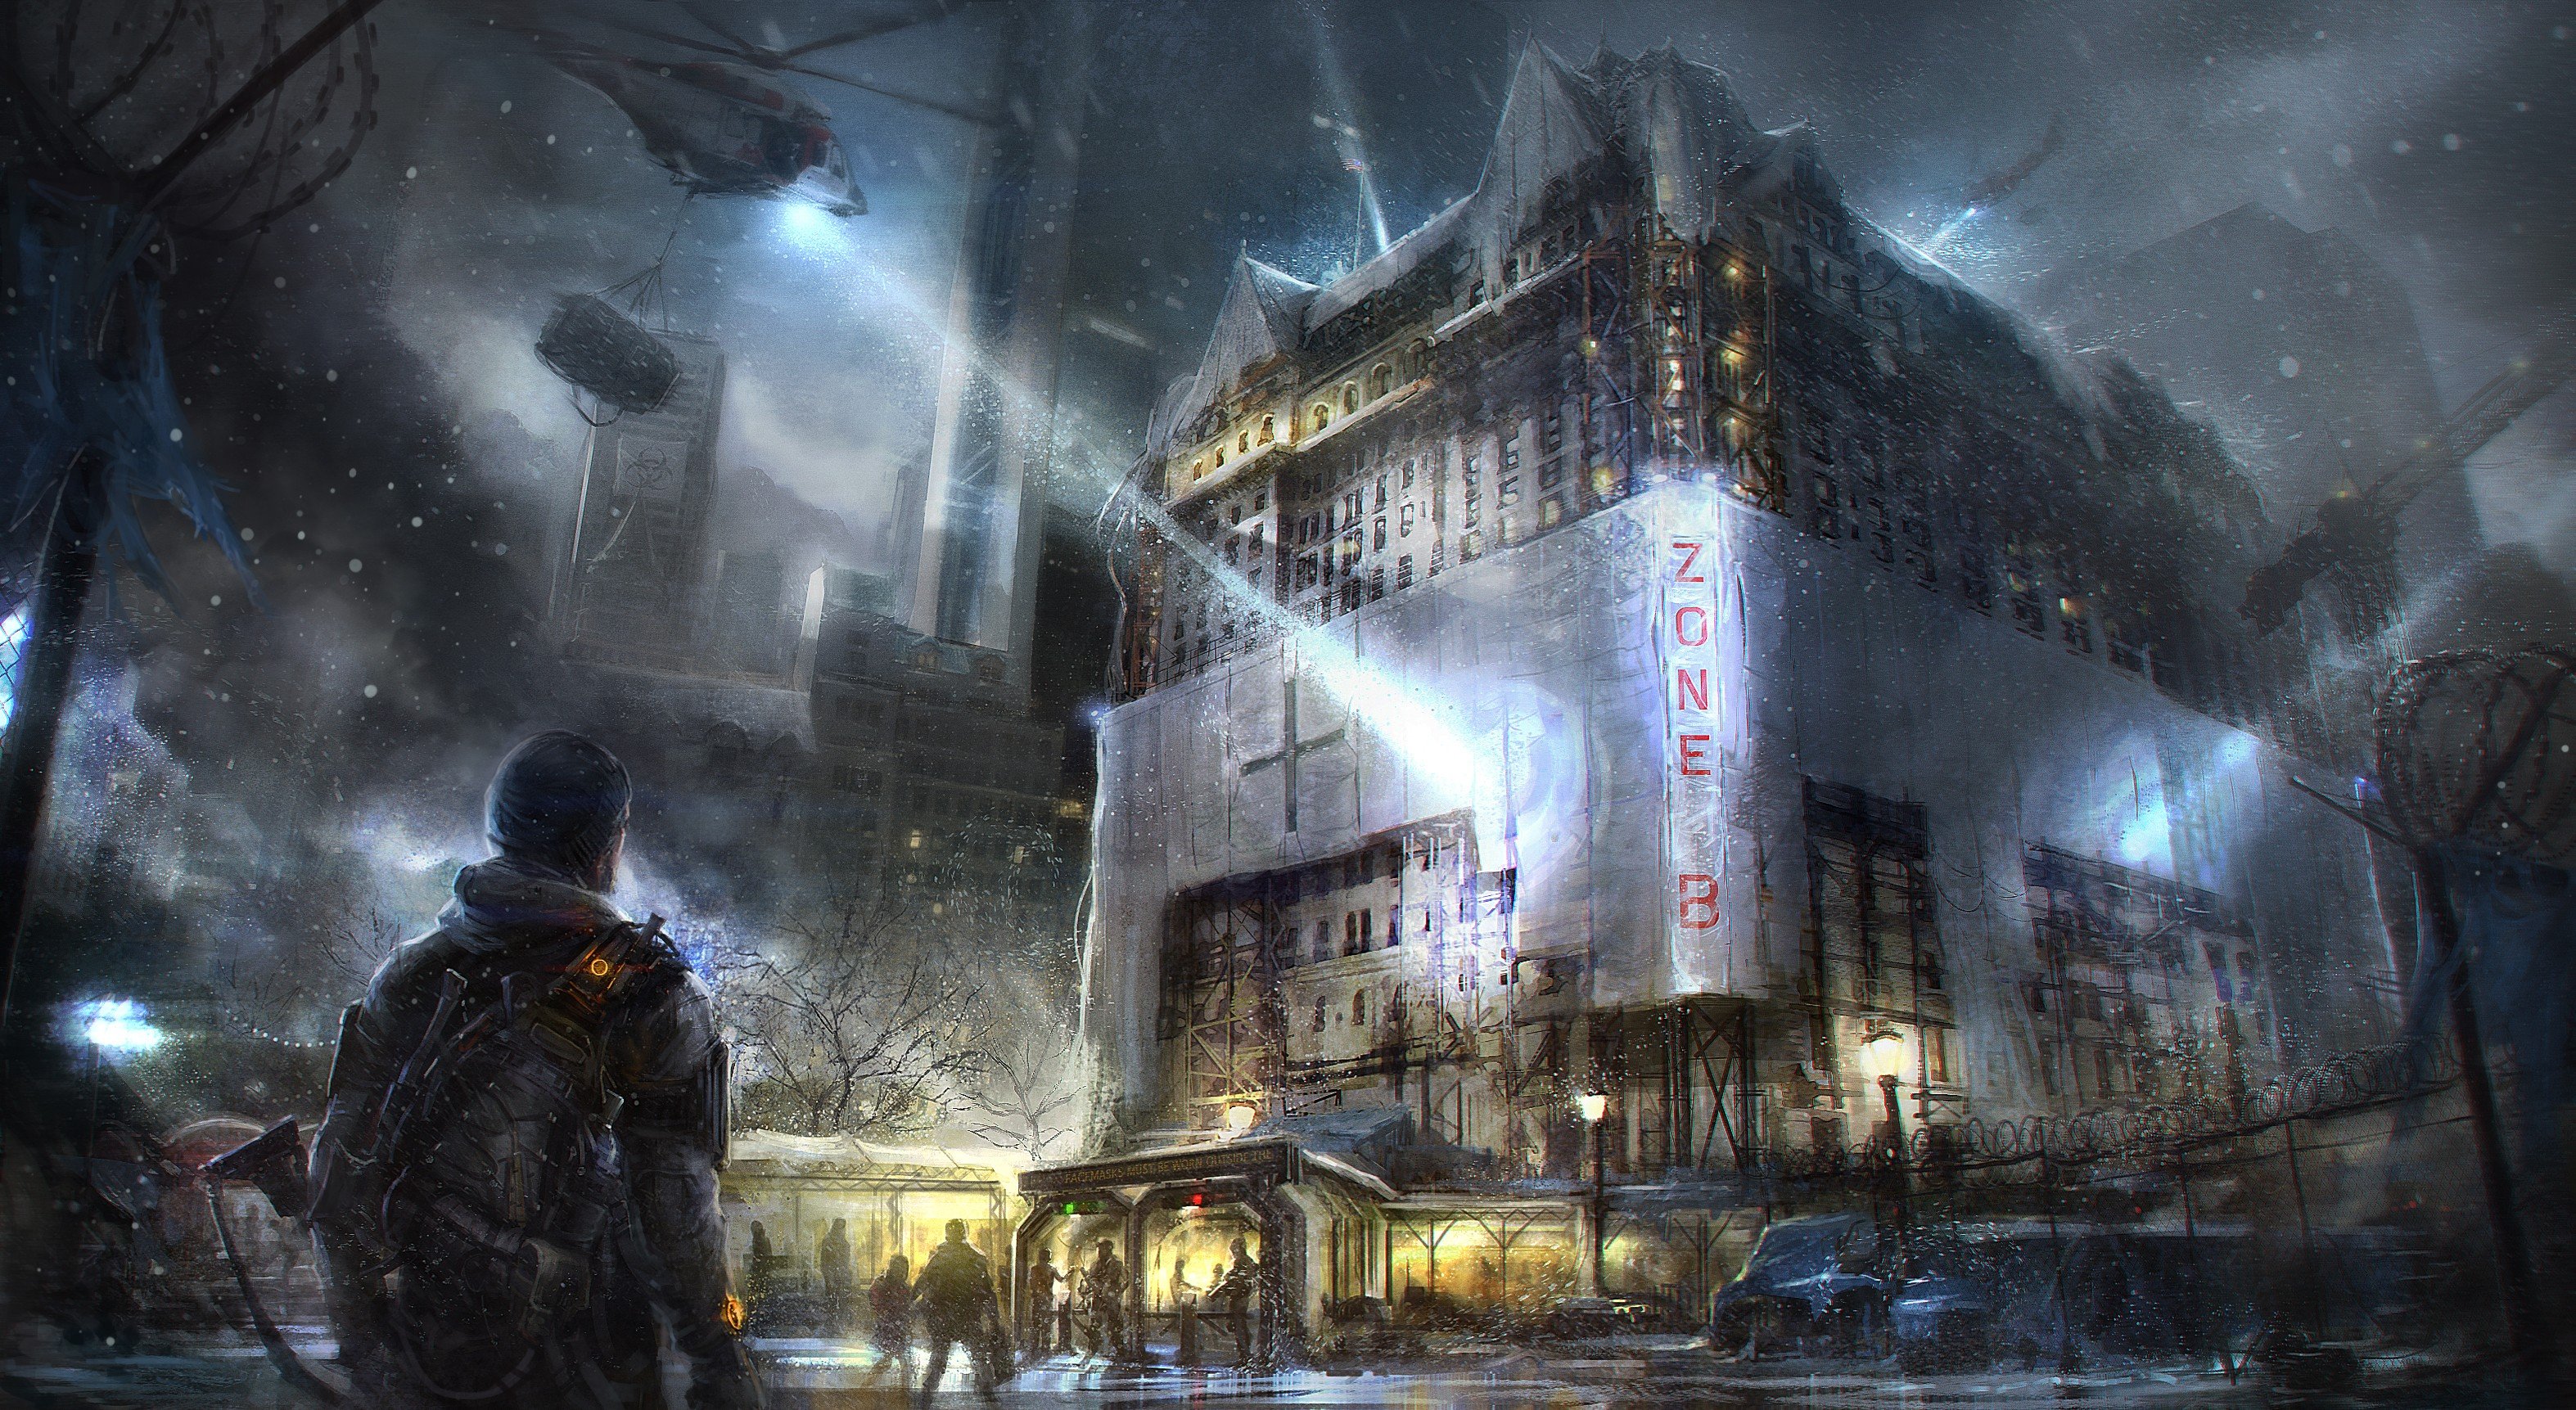 Tom Clancys The Division, Computer game, Concept art Wallpaper